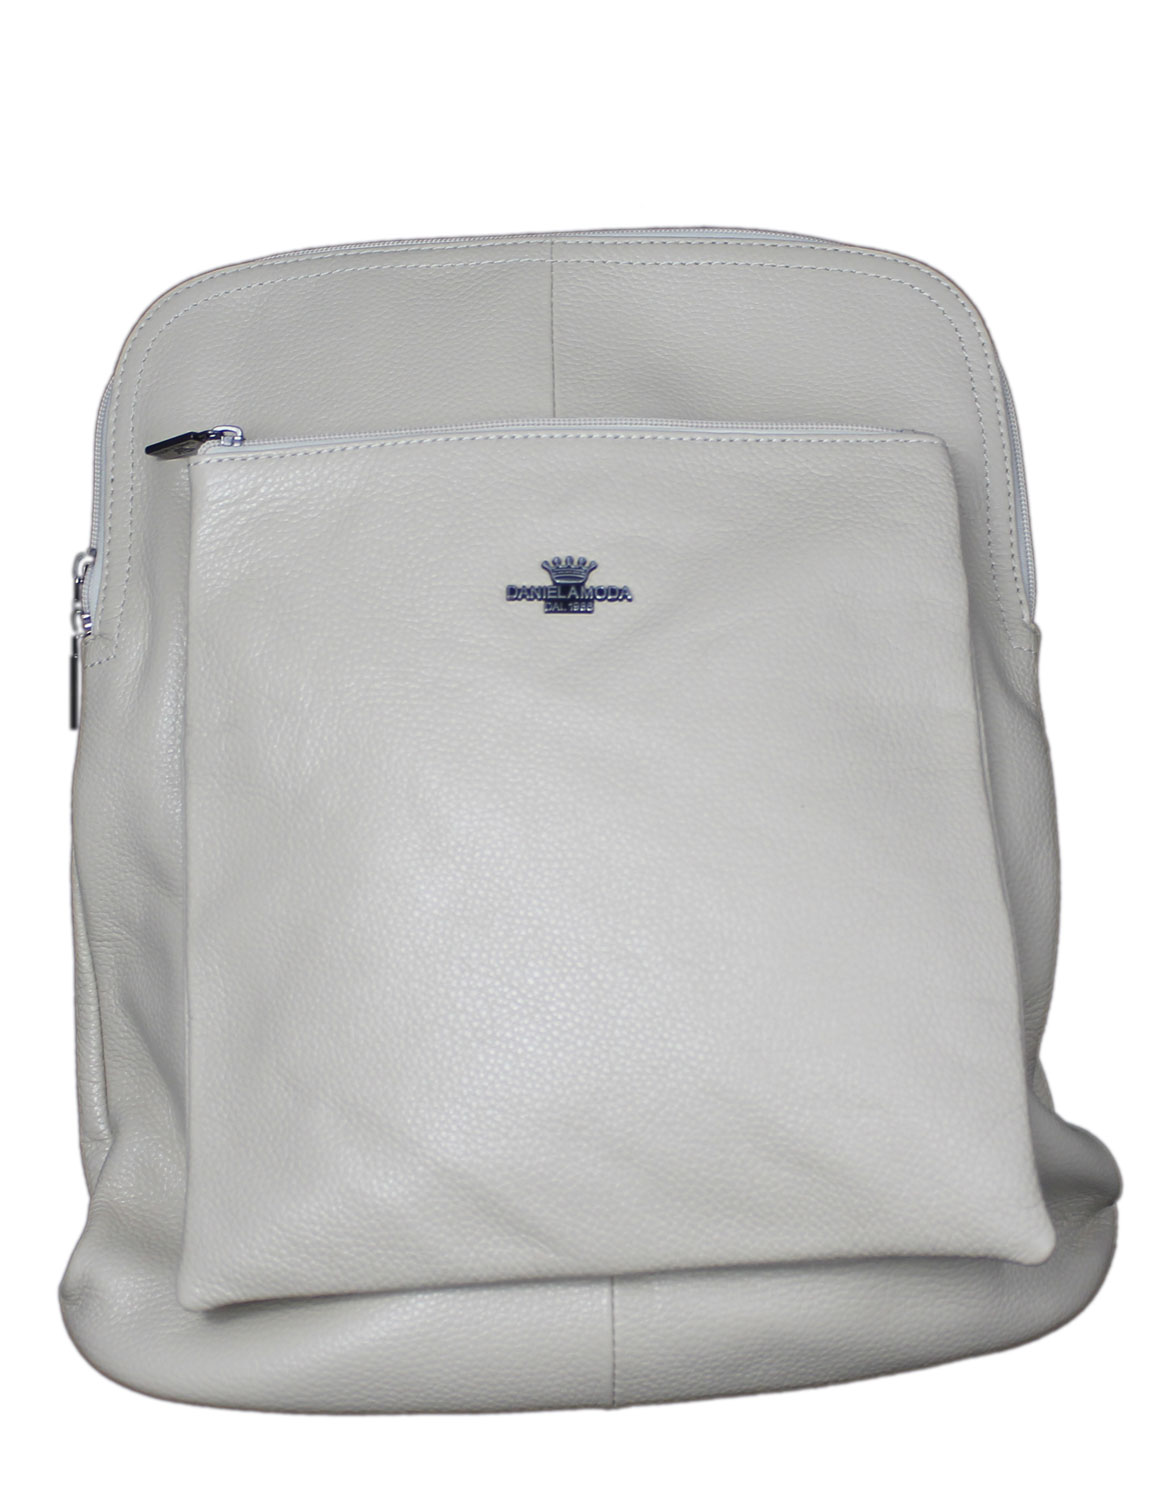 Florence Soft Leather Rucksack in Off White with Brown Trim